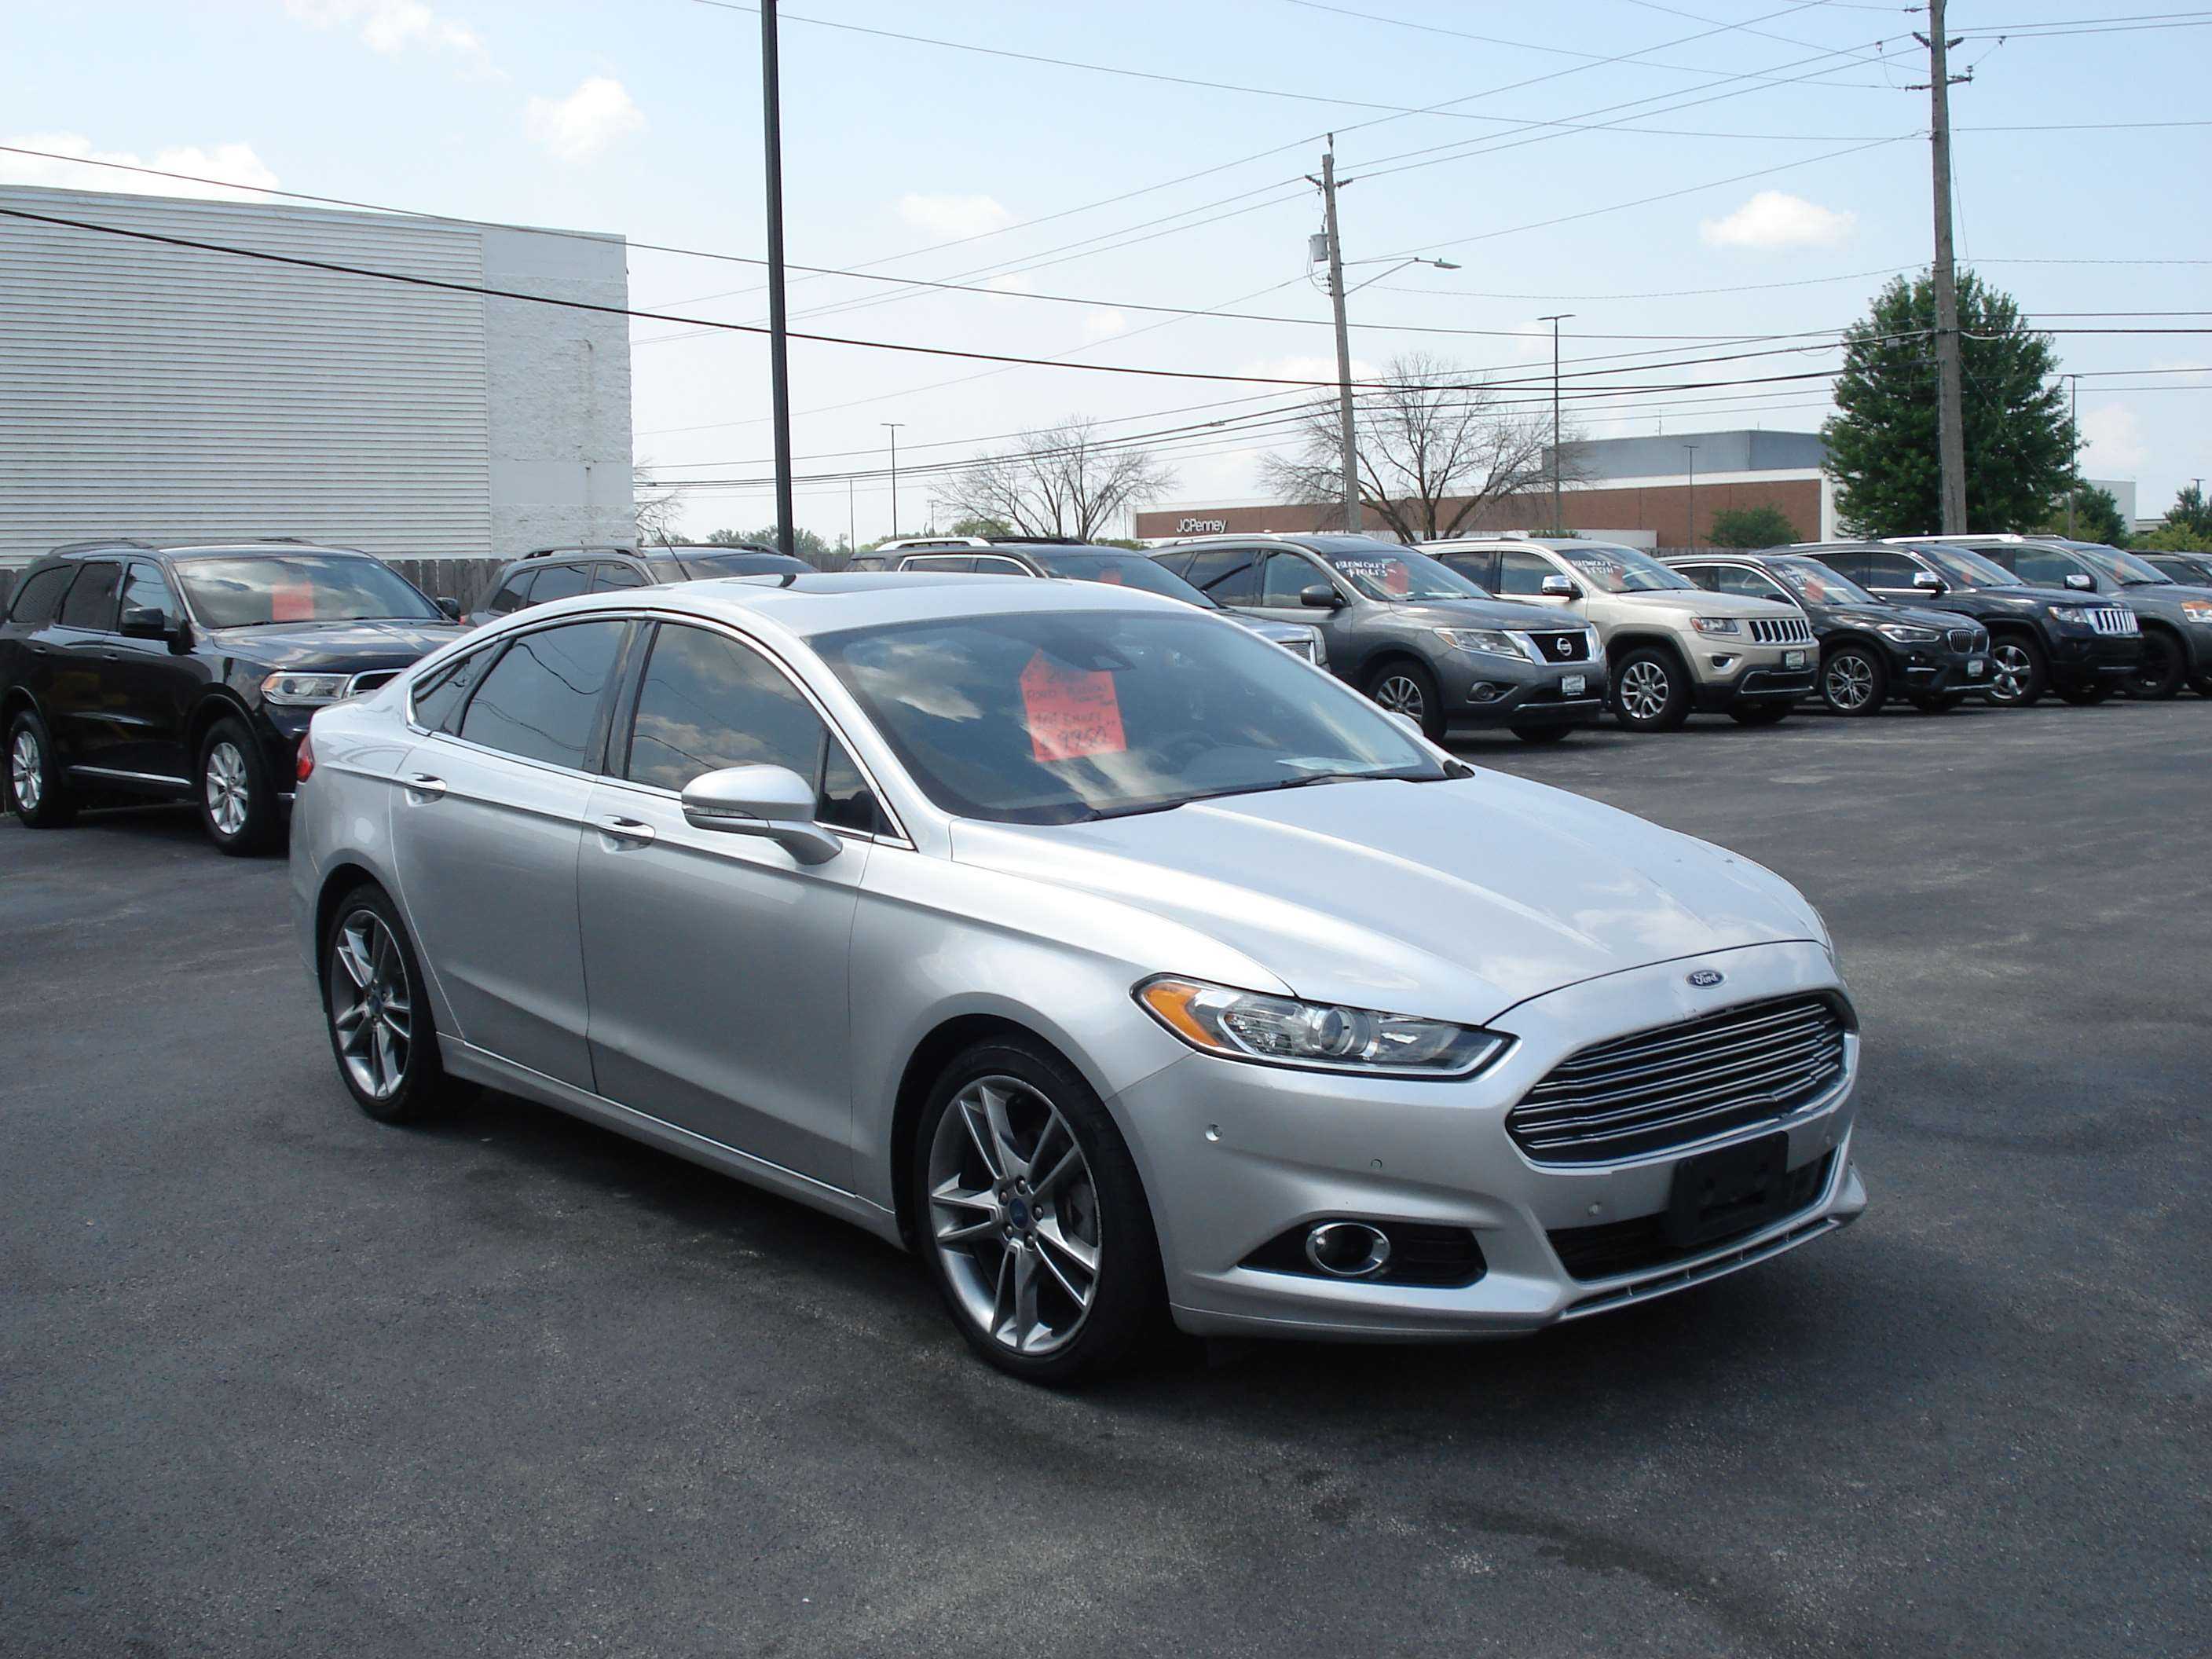 Ford Fusion Image 4